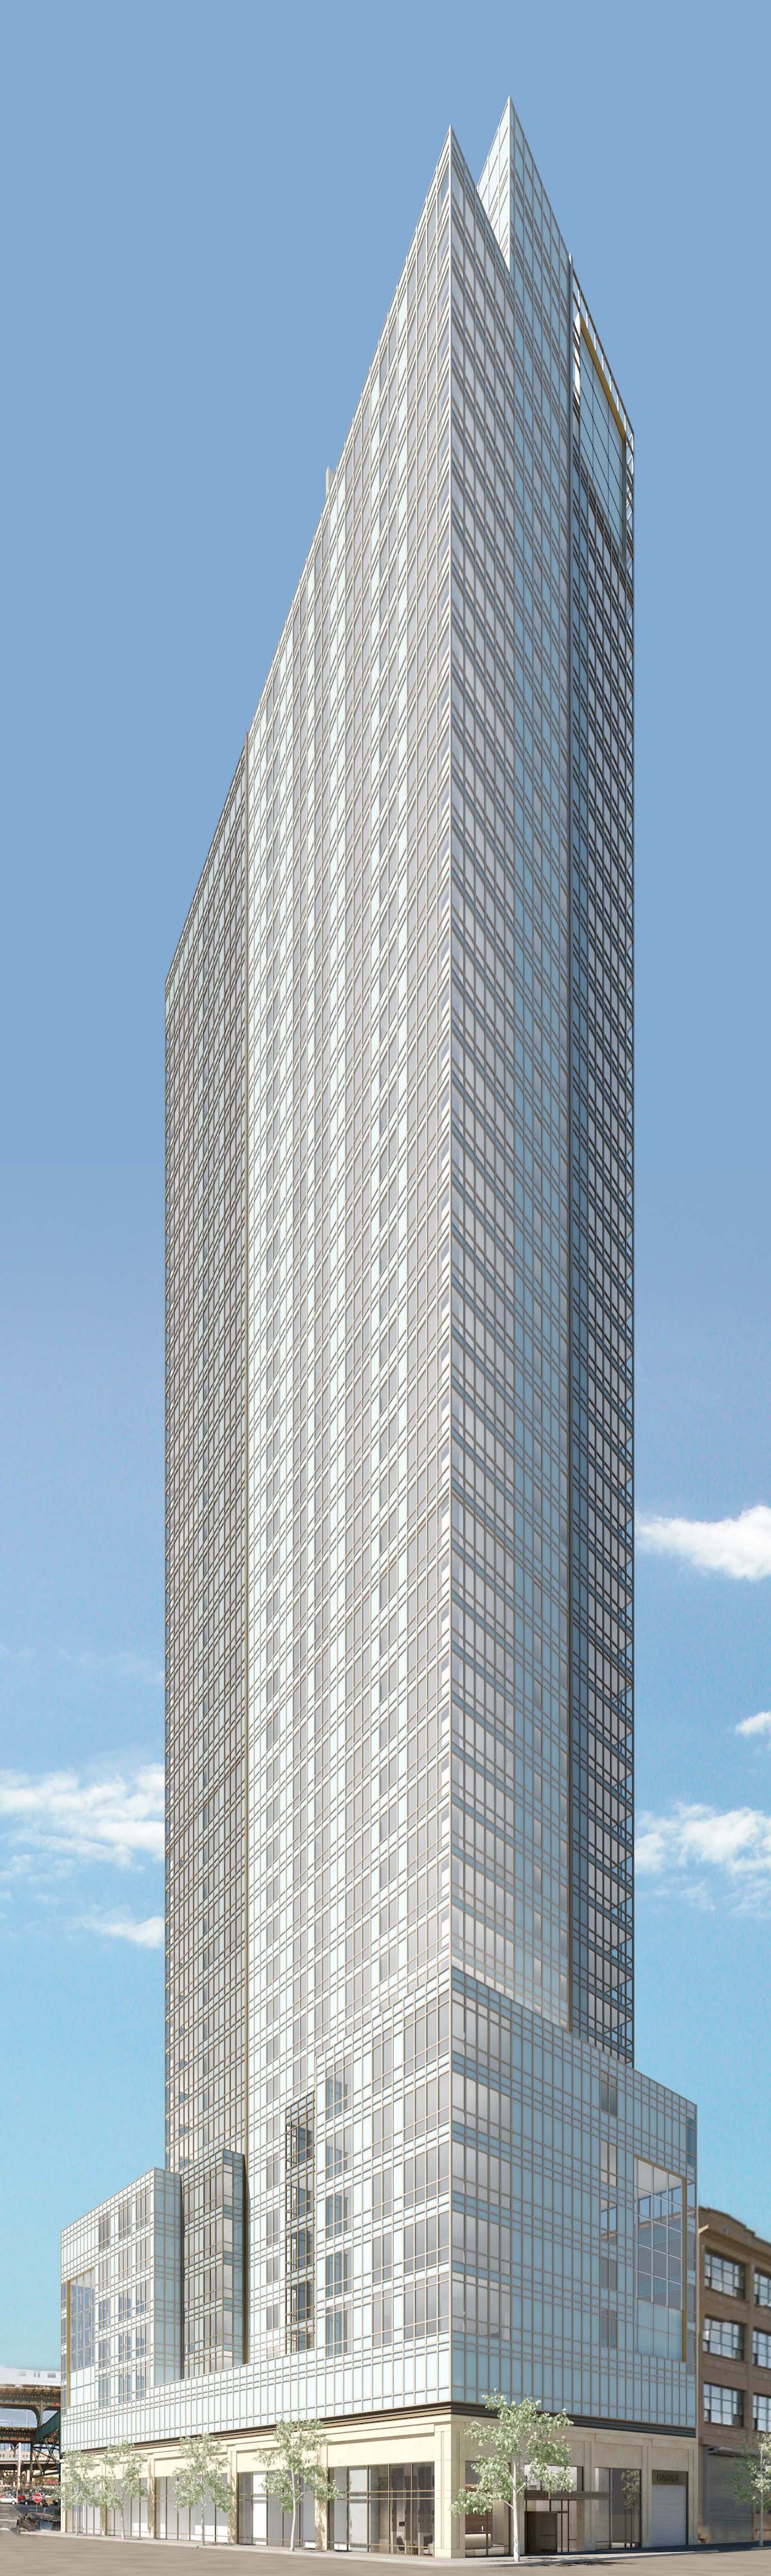 23-10 Queens Plaza South, rendering via Property Markets Group